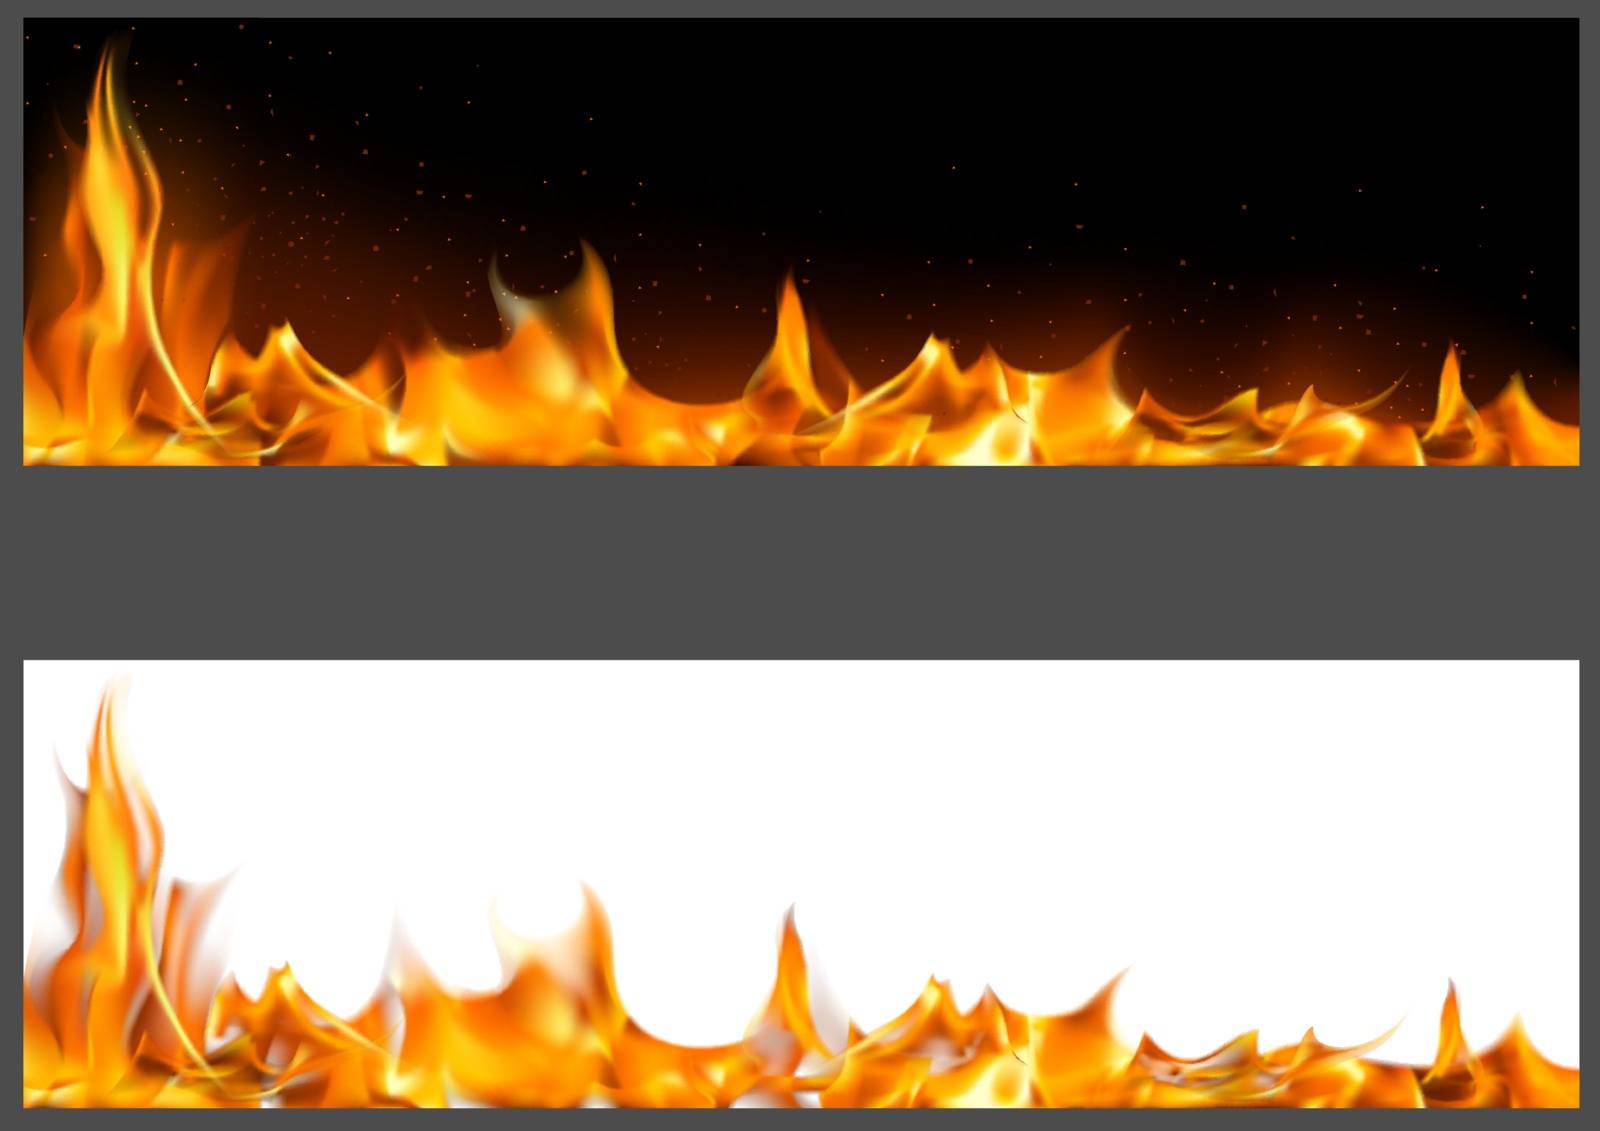 Realistic Fire Flames on Banners - Two Graphic Variants with Black and White Backgrounds, Vector Illustration